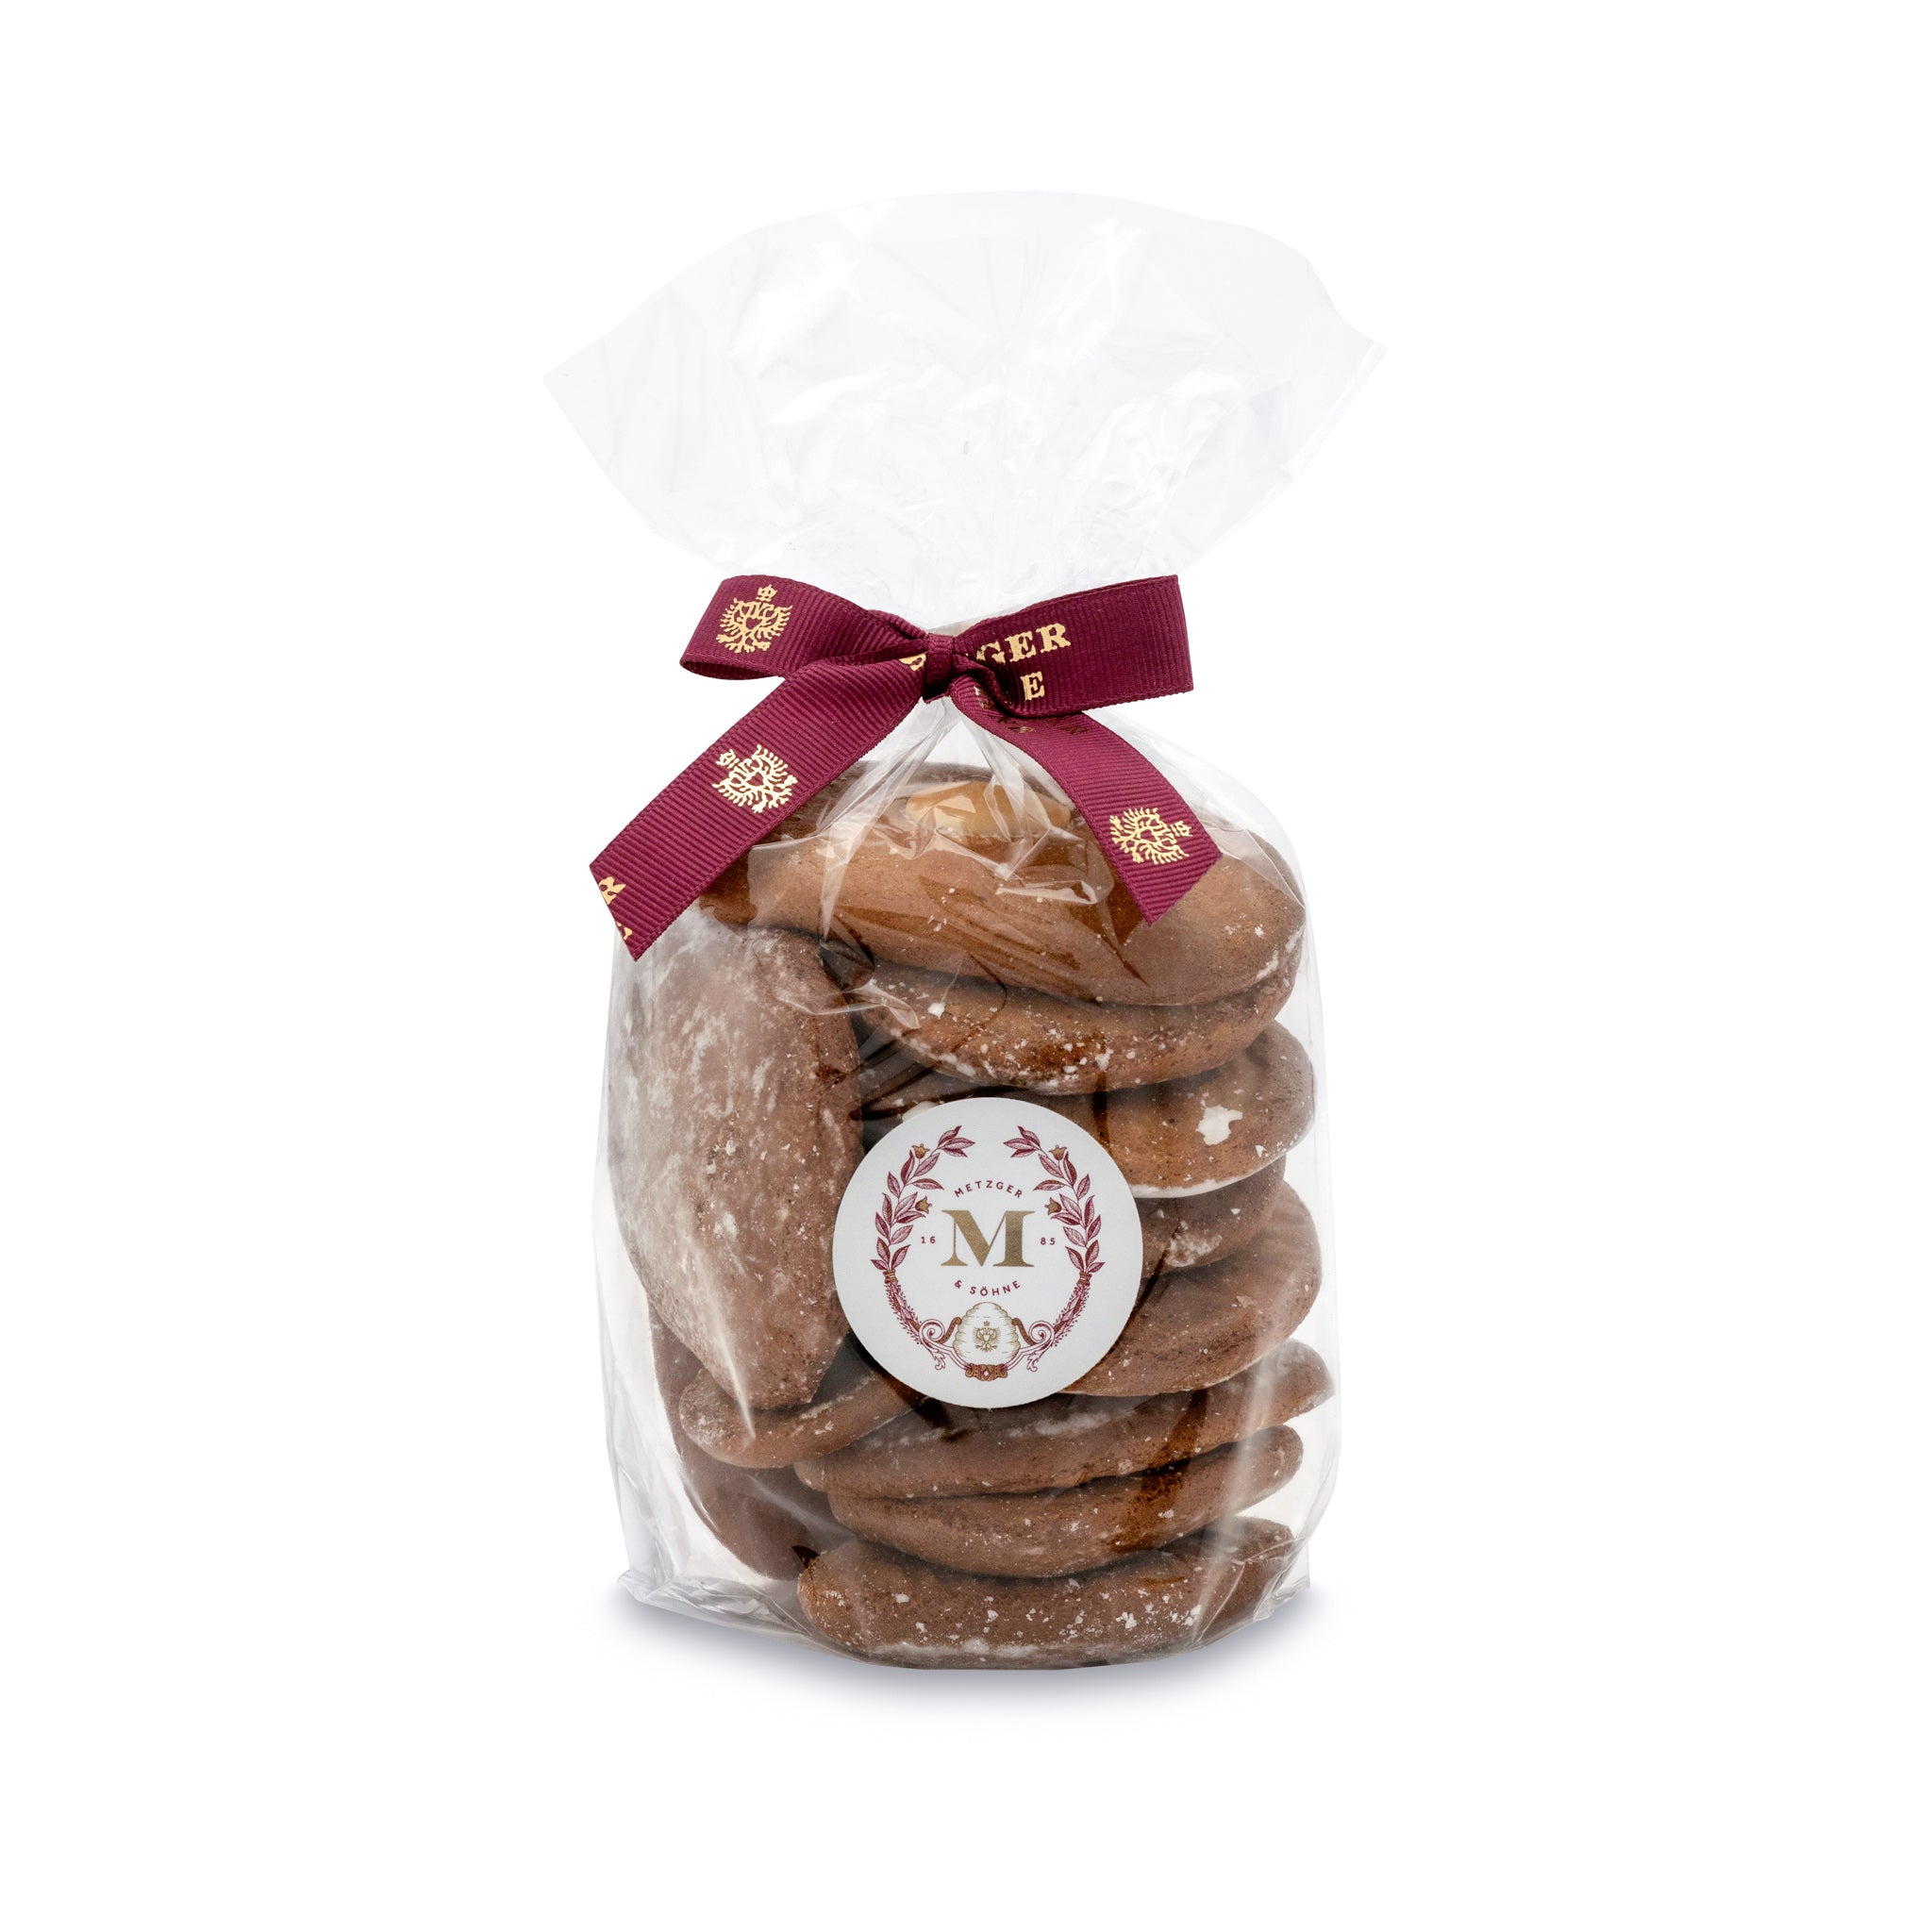 Our Honey Lebkuchen is our signature House Lebkuchen that forms the basis of all our specialities. Metzger Lebkuchen is Viennese gingerbread with a soft texture and subtle taste. The honey dough is refined with spices, topped with almonds and glazed with sugar after baking. House Lebkuchen is a true Viennese staple at the Christmas table.